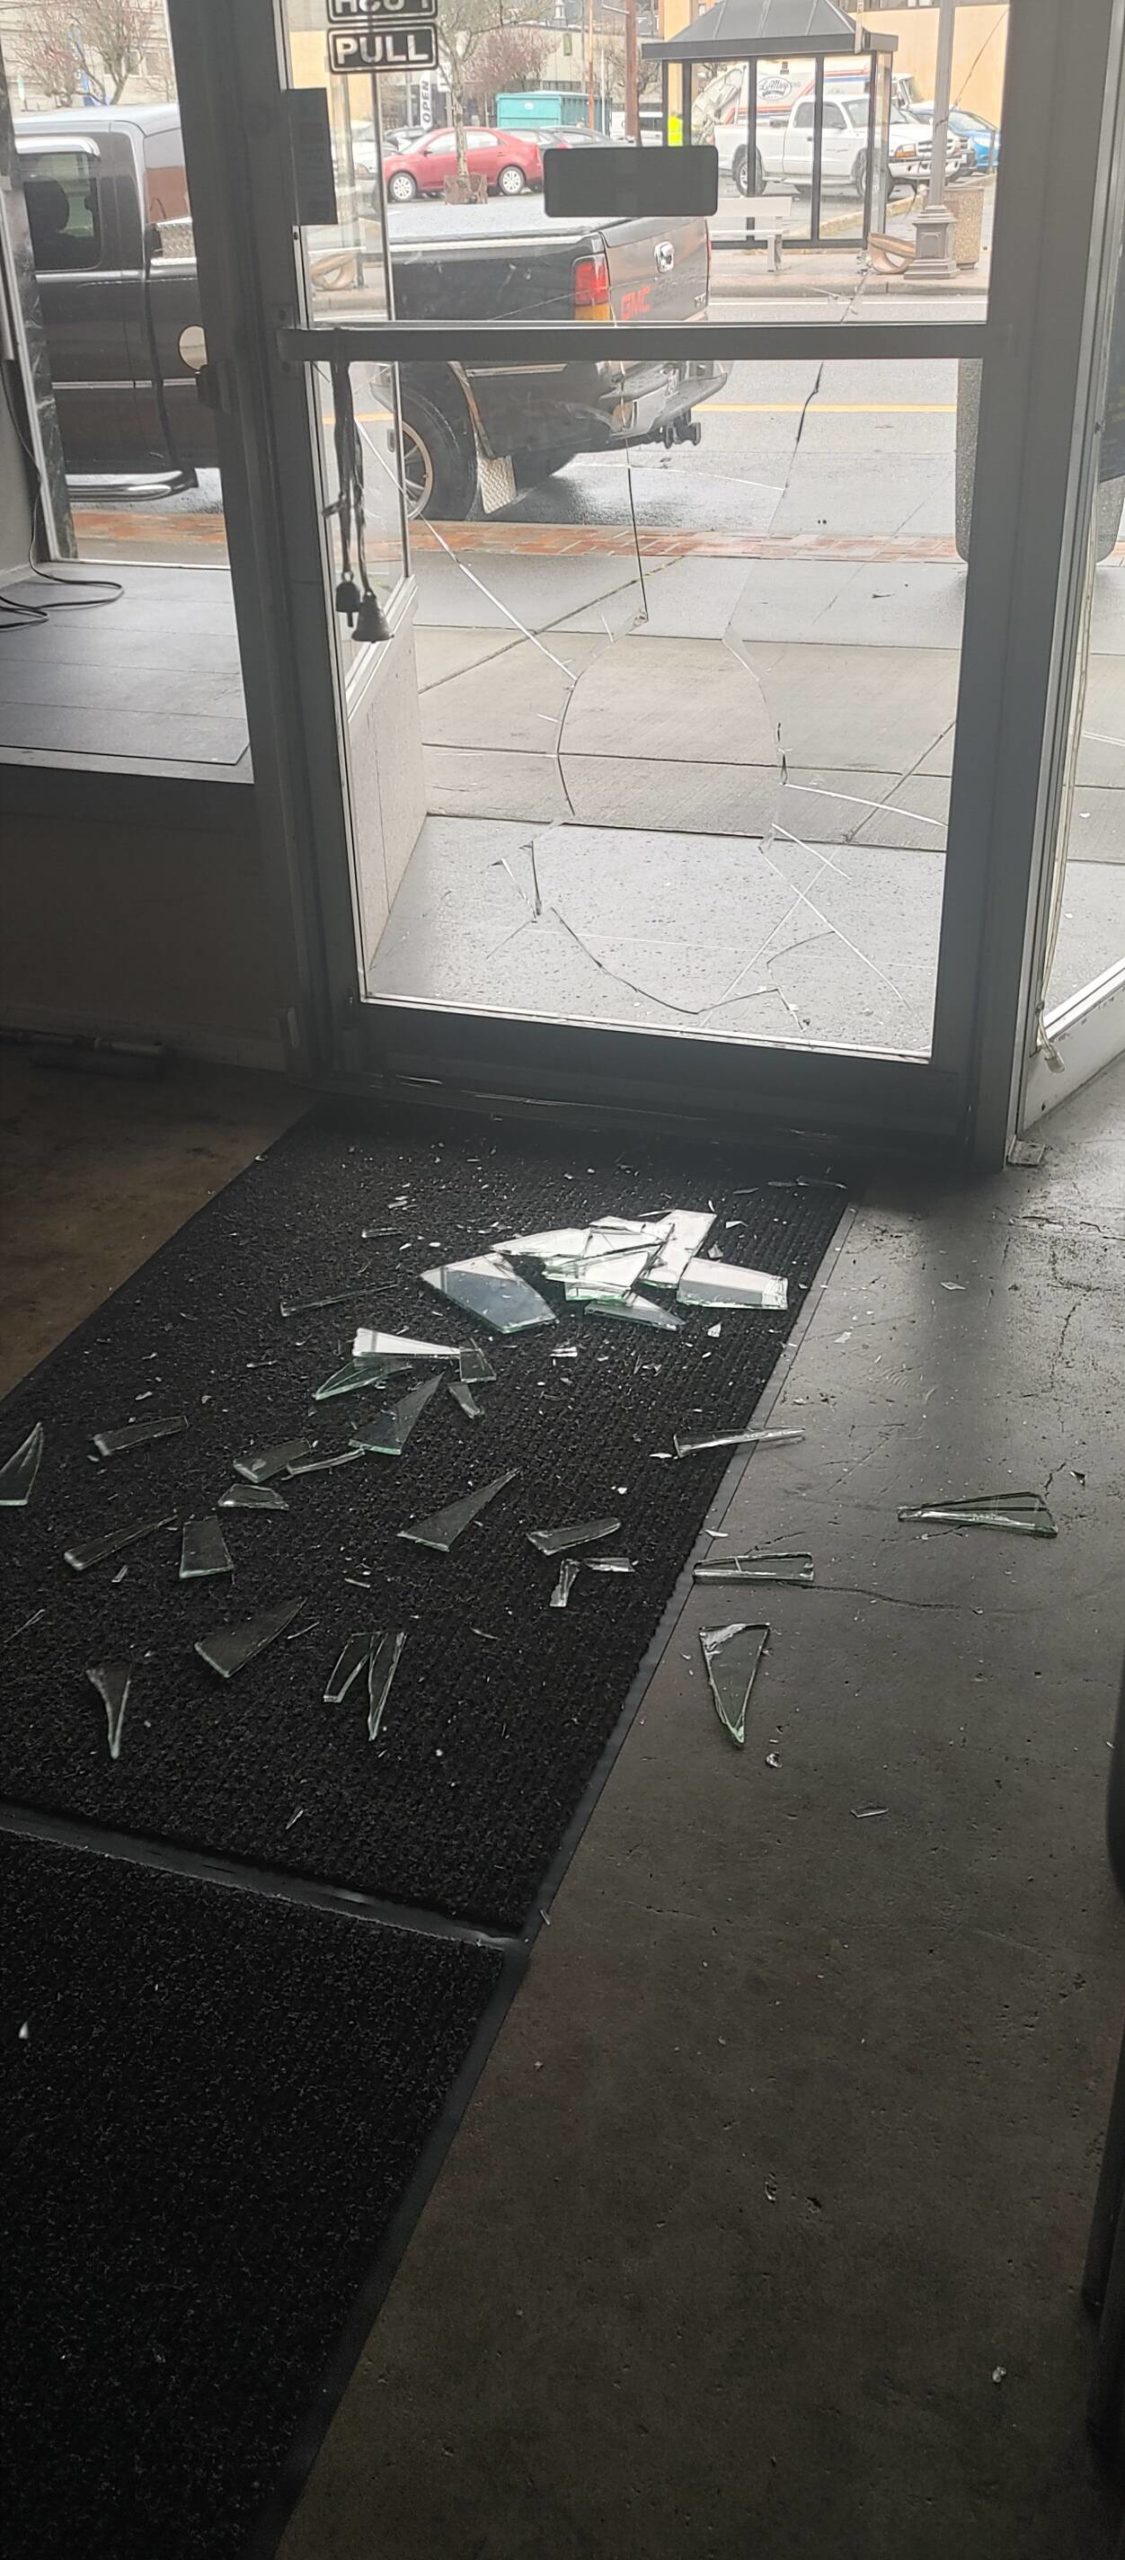 David Gleaves, owner of Deen Dogs, had to call his landlord to get his glass door fixed after a vandal “punched” the front door to his business on Wednesday evening, April 20, 2022. Gleaves said it took about a week to replace the glass, largely because of the frame and the type of glass used. Provided photo